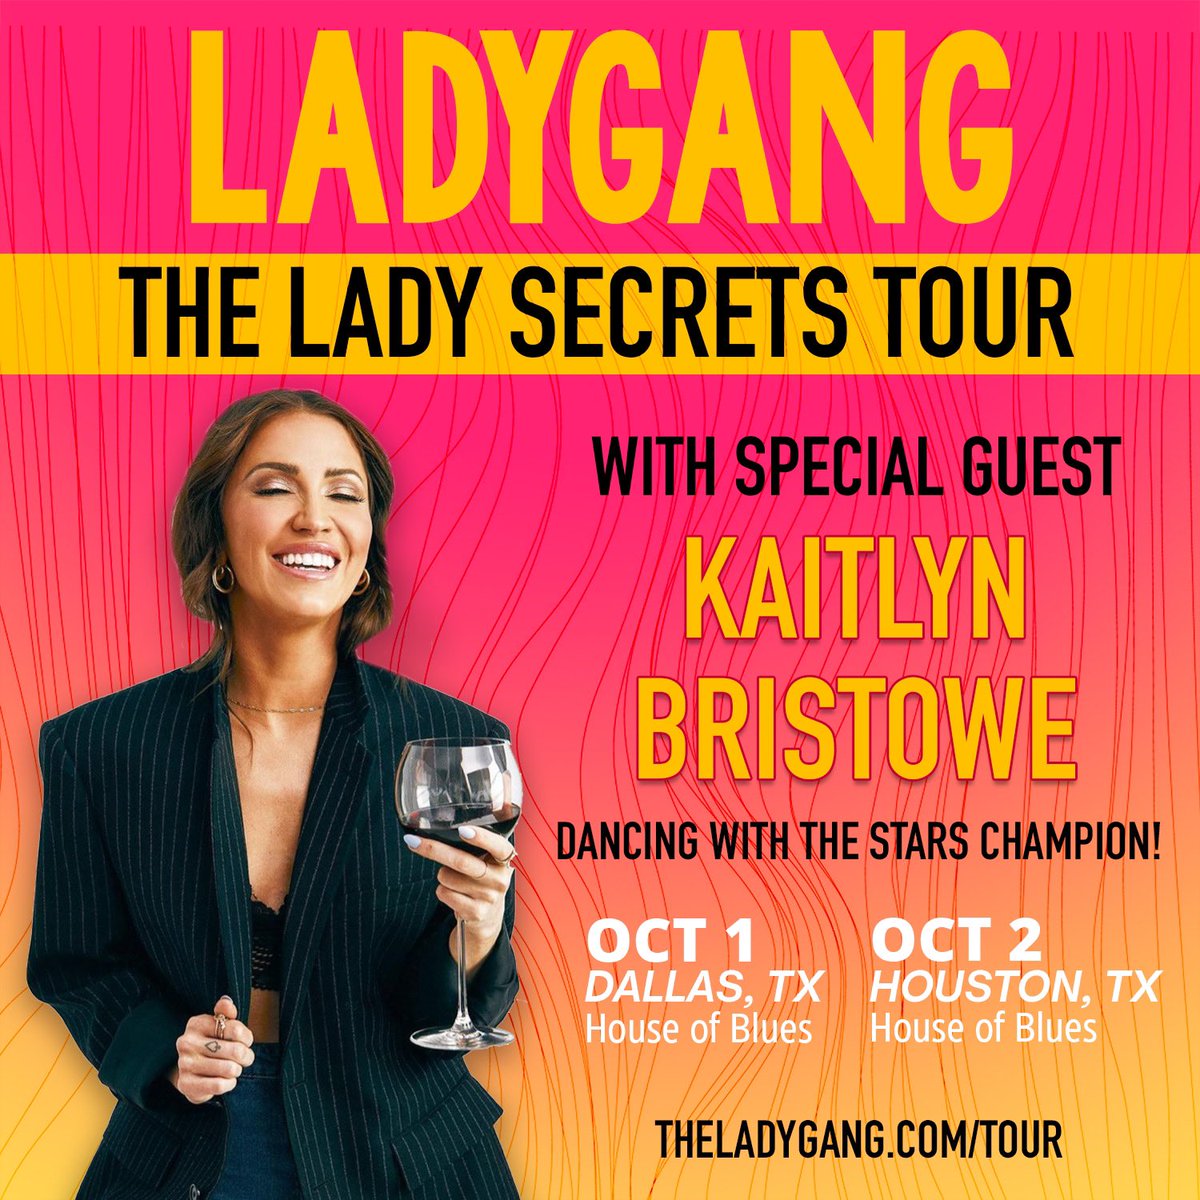 ANNOUNCEMENT! @kaitlynbristowe is our special guest for our Texas shows! Get tix here: spadeandsparrows.com #BachelorNation #dwts #podcasts